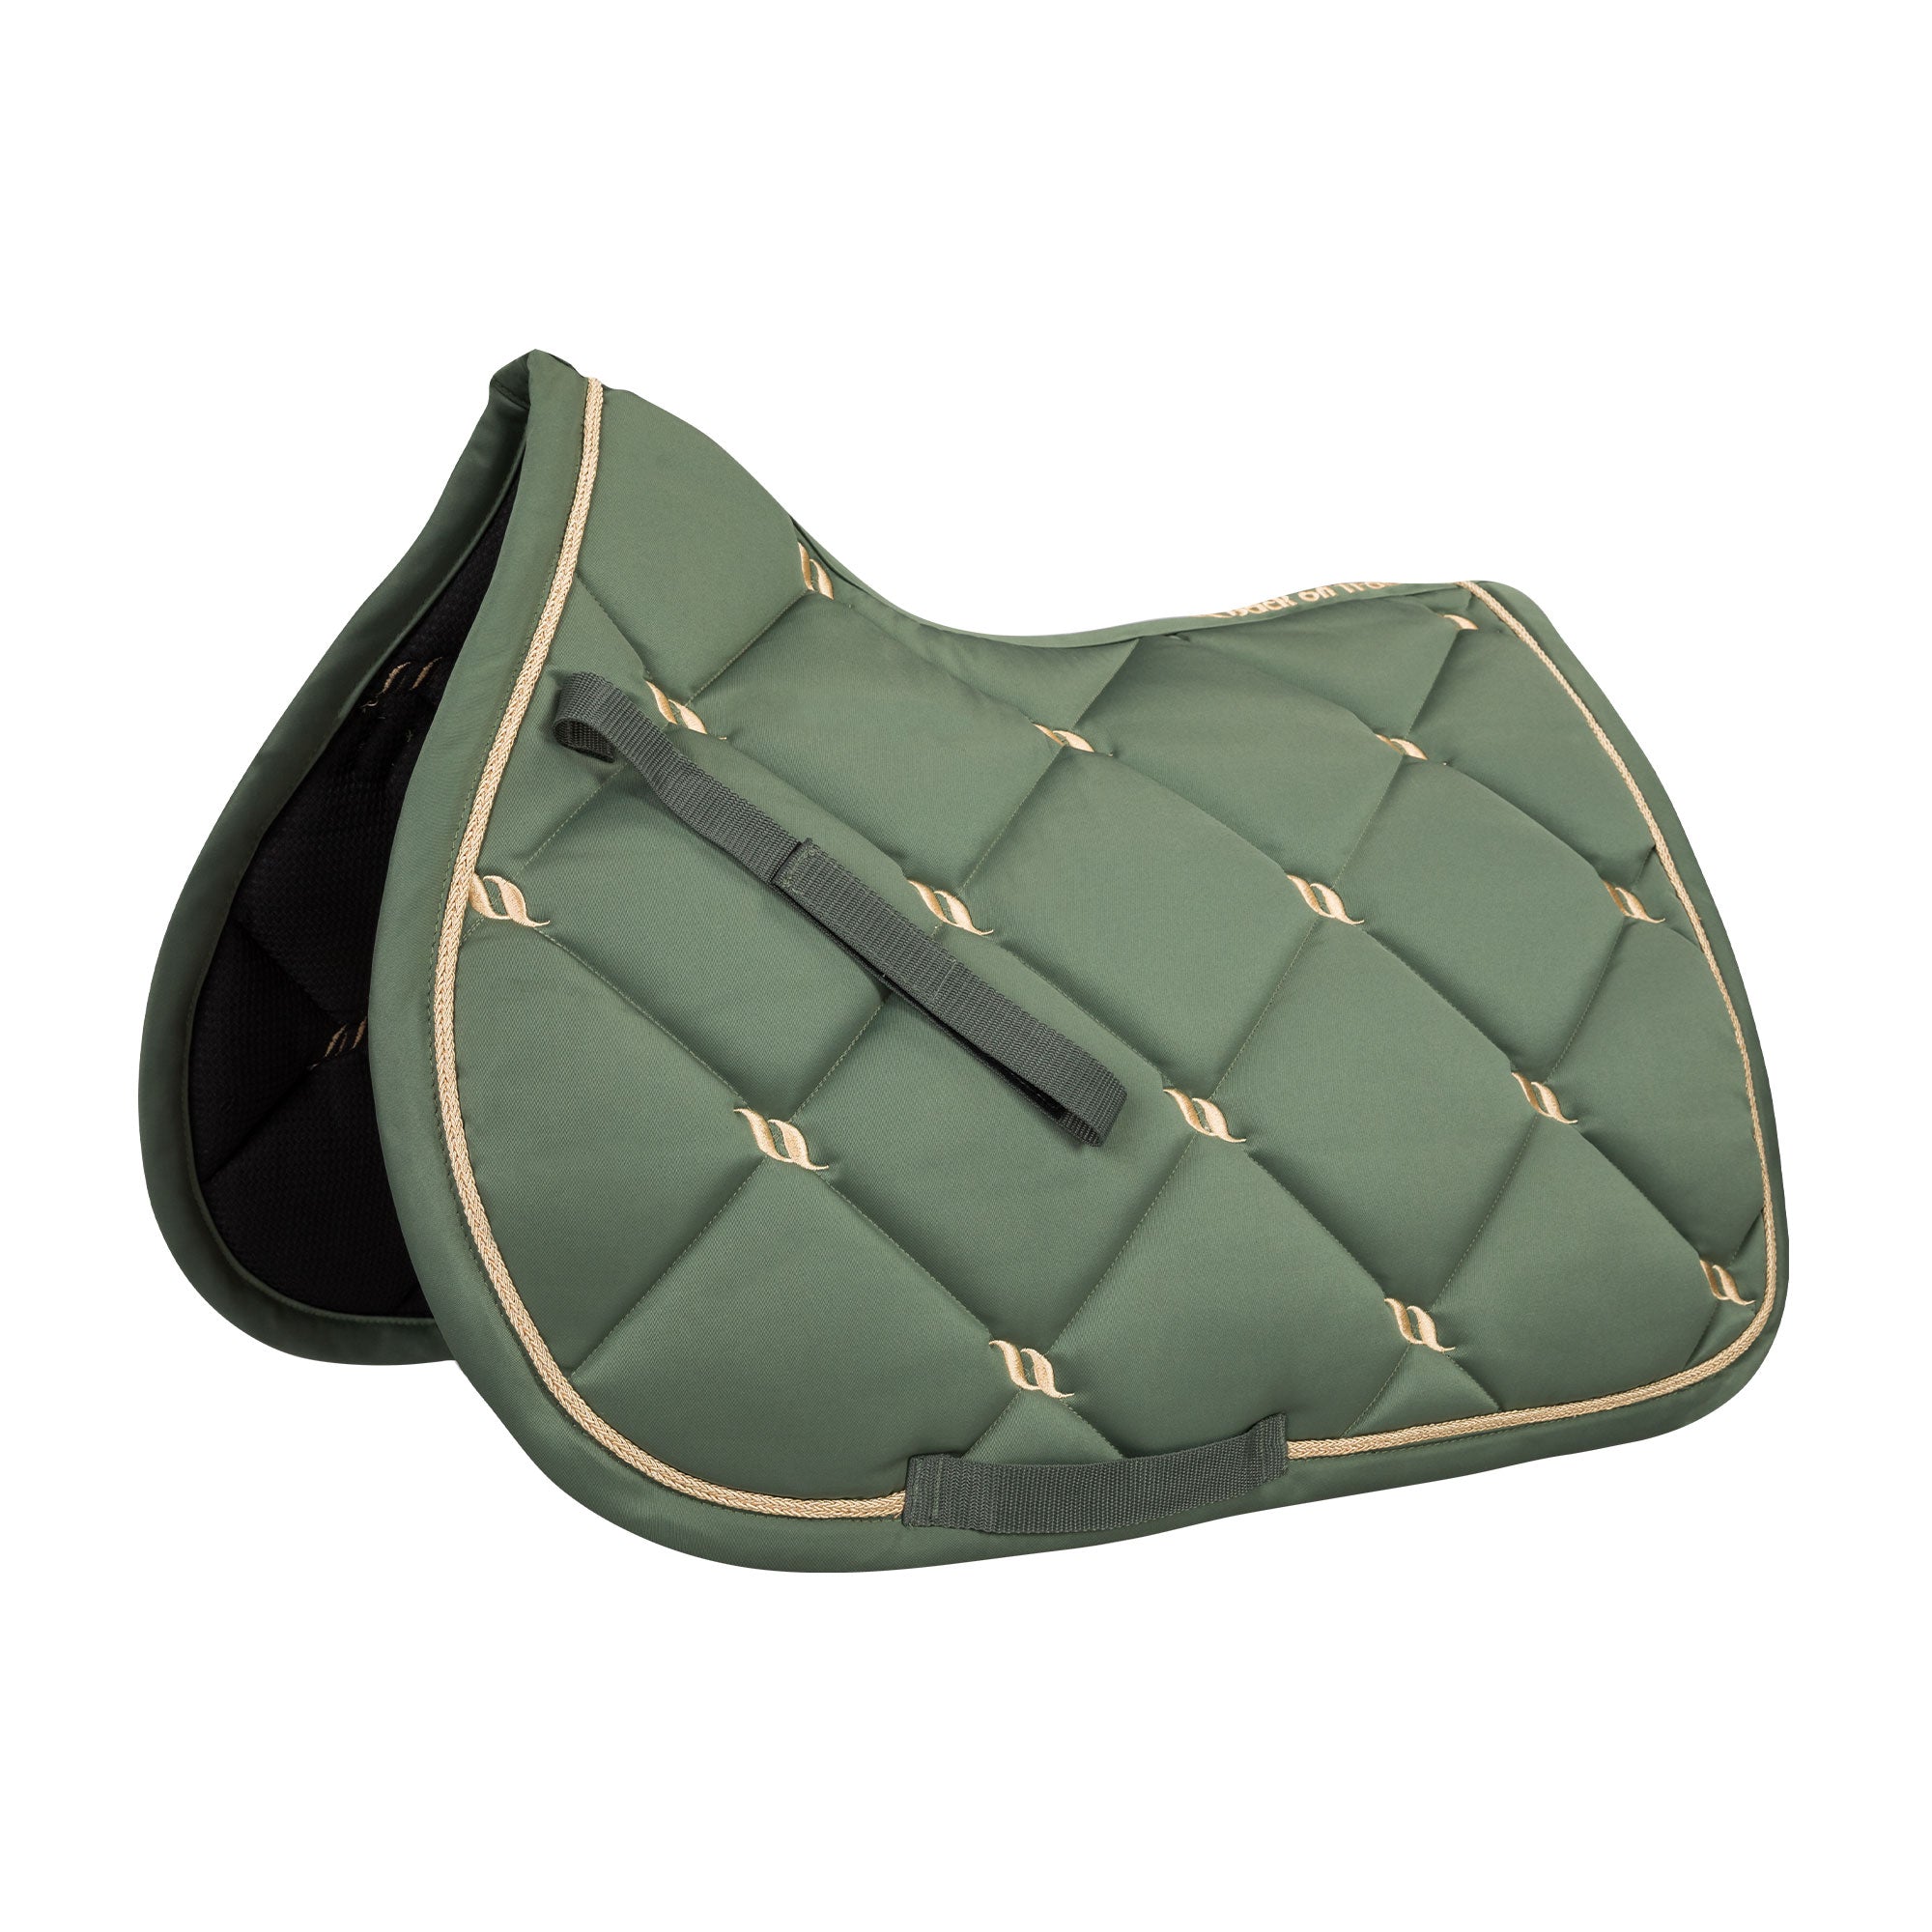 "Nights" Collection Tapis de Selle CSO Vert Olive